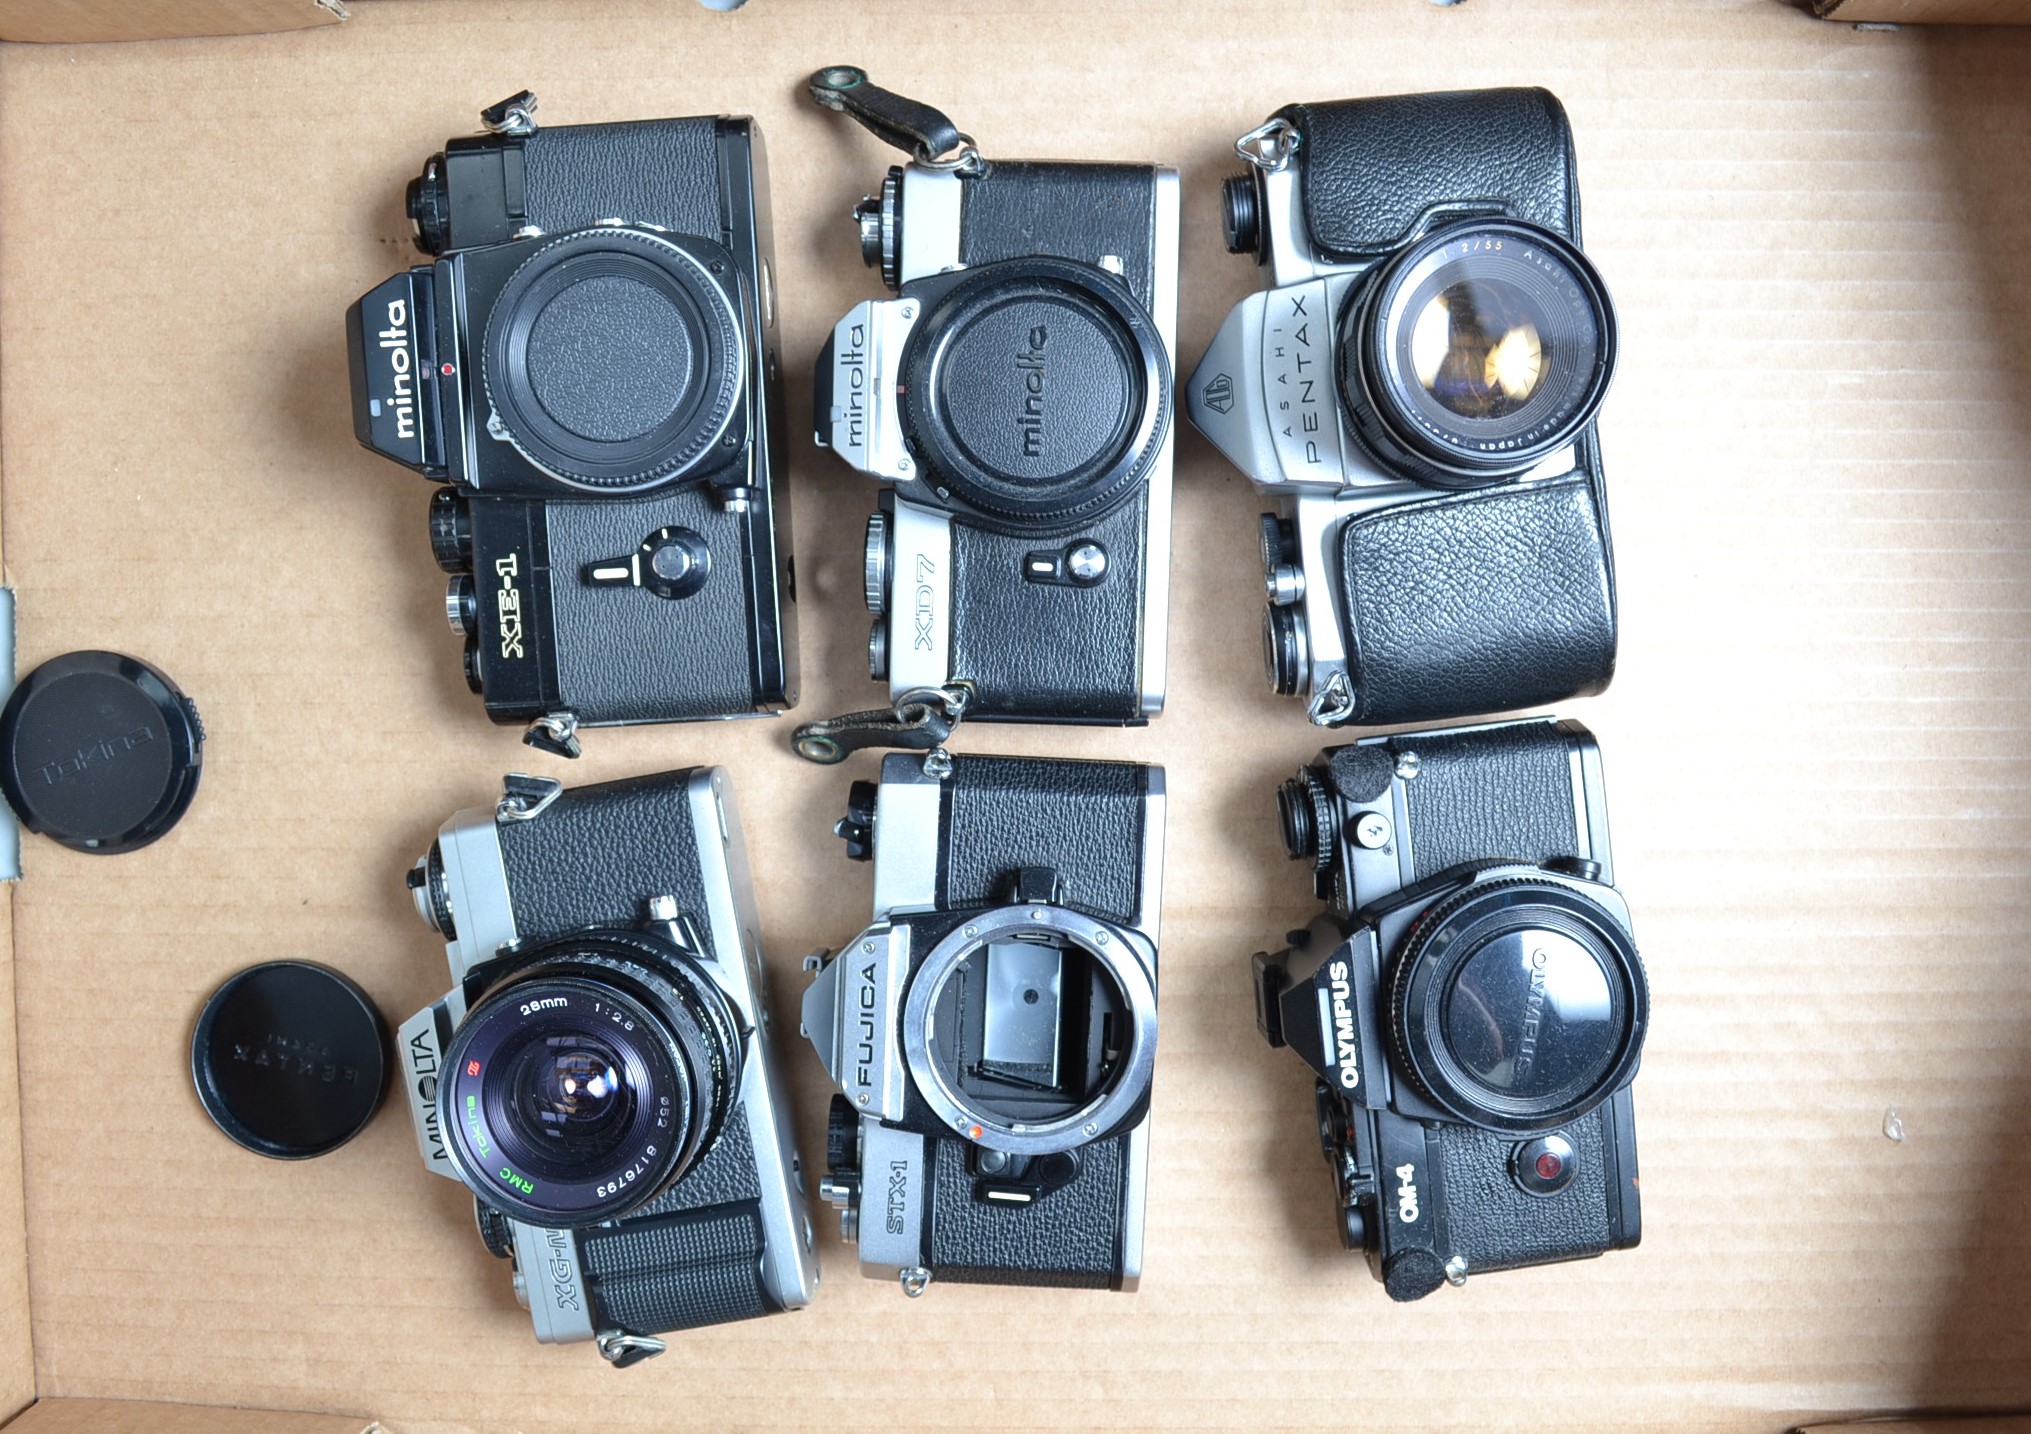 SLR Cameras and Bodies, a Minolta XG-M , with Tokina 28mm f/2.8 lens, Pentax Asahi, with 55mm f/2